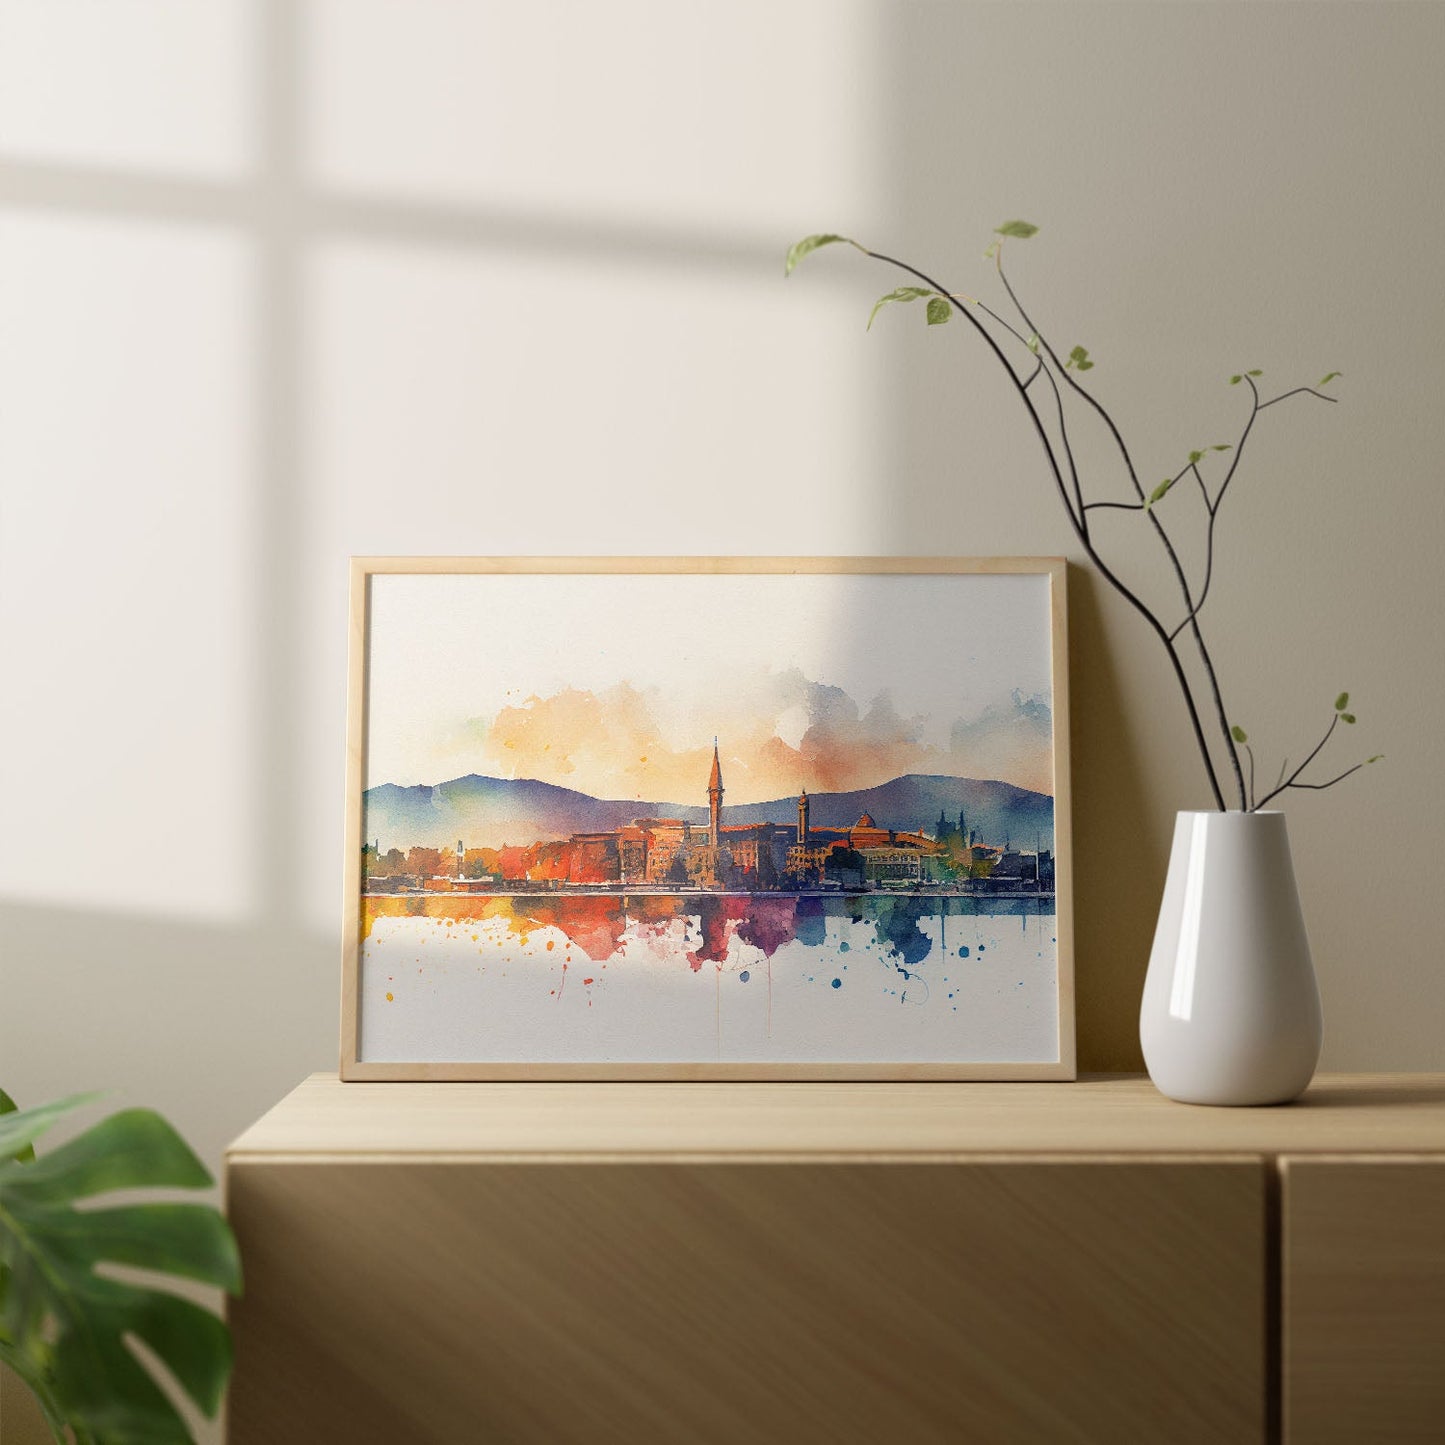 Nacnic watercolor of a skyline of the city of Geneva_2. Aesthetic Wall Art Prints for Bedroom or Living Room Design.